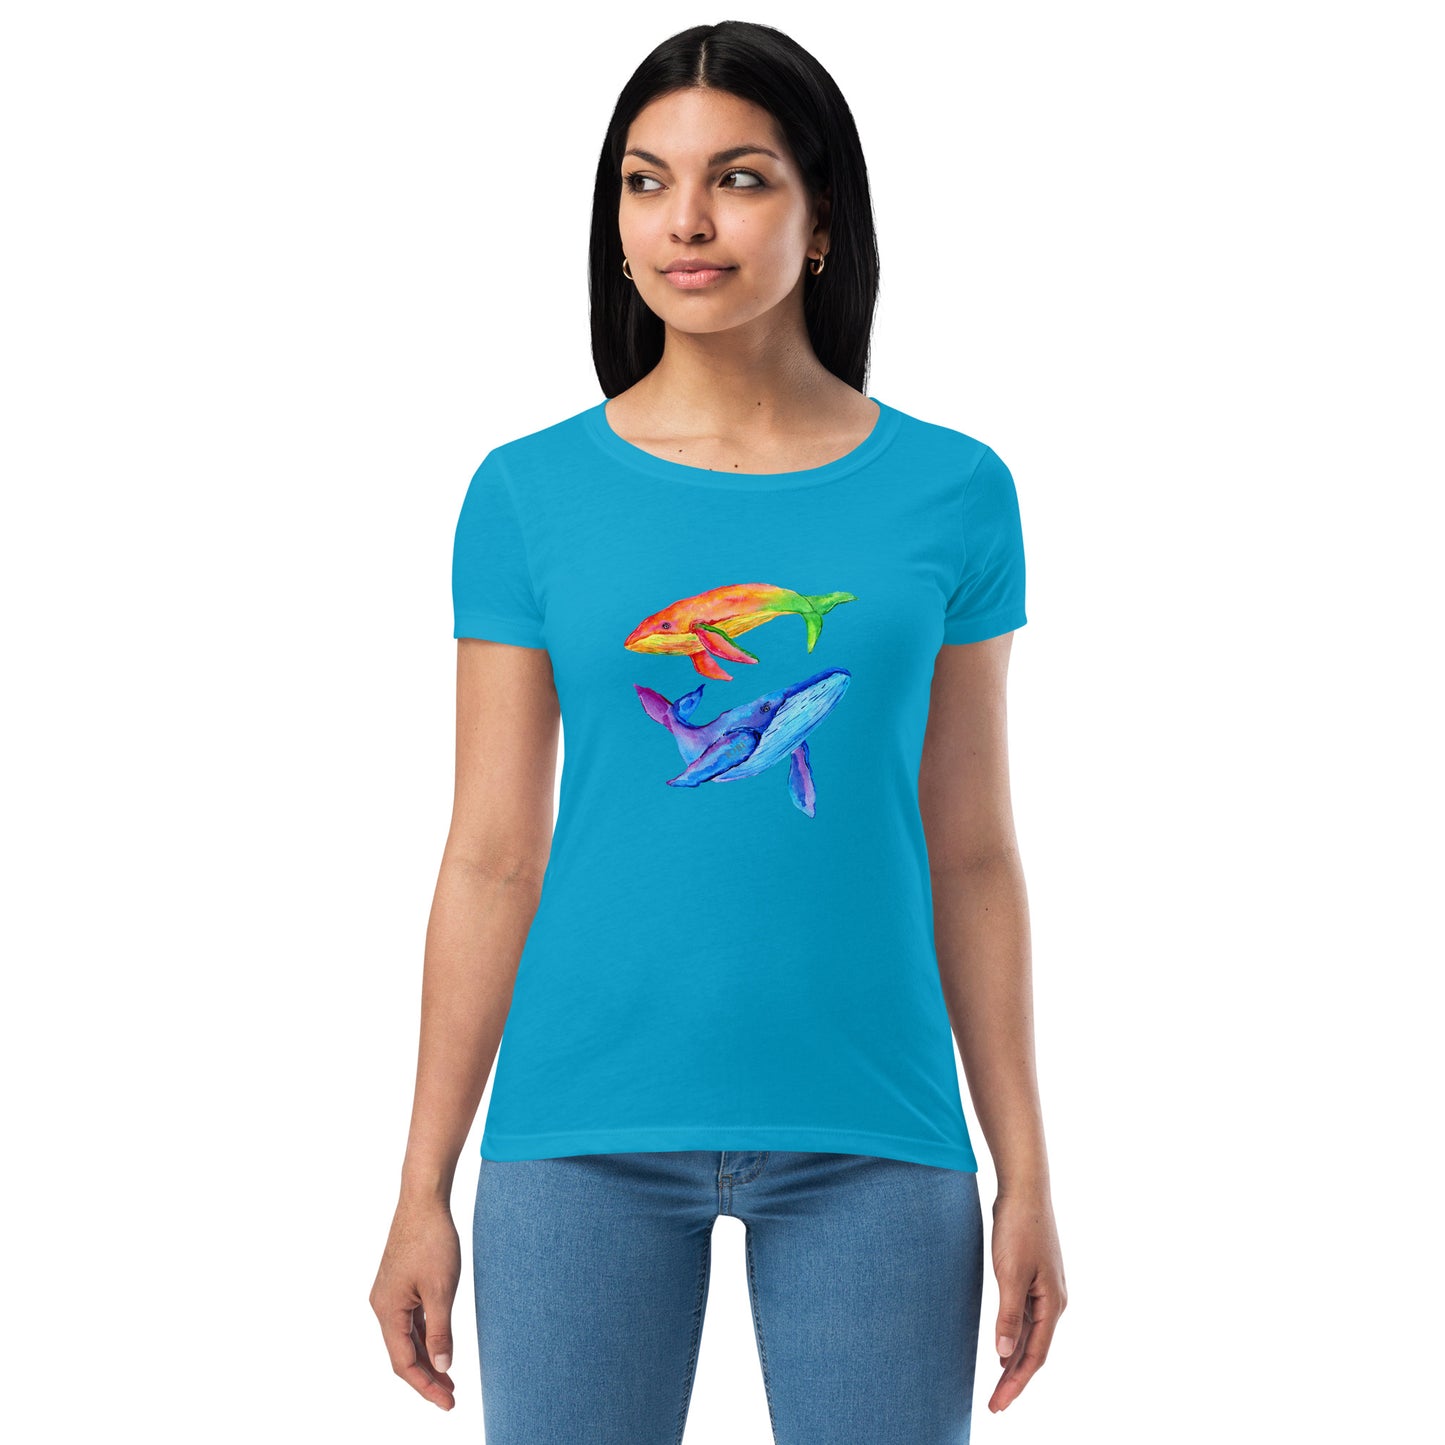 Women’s Fitted T-Shirt Super Soft & Stretchy Slim Fit Next Level Magical Whales Design by IOBI Original Apparel